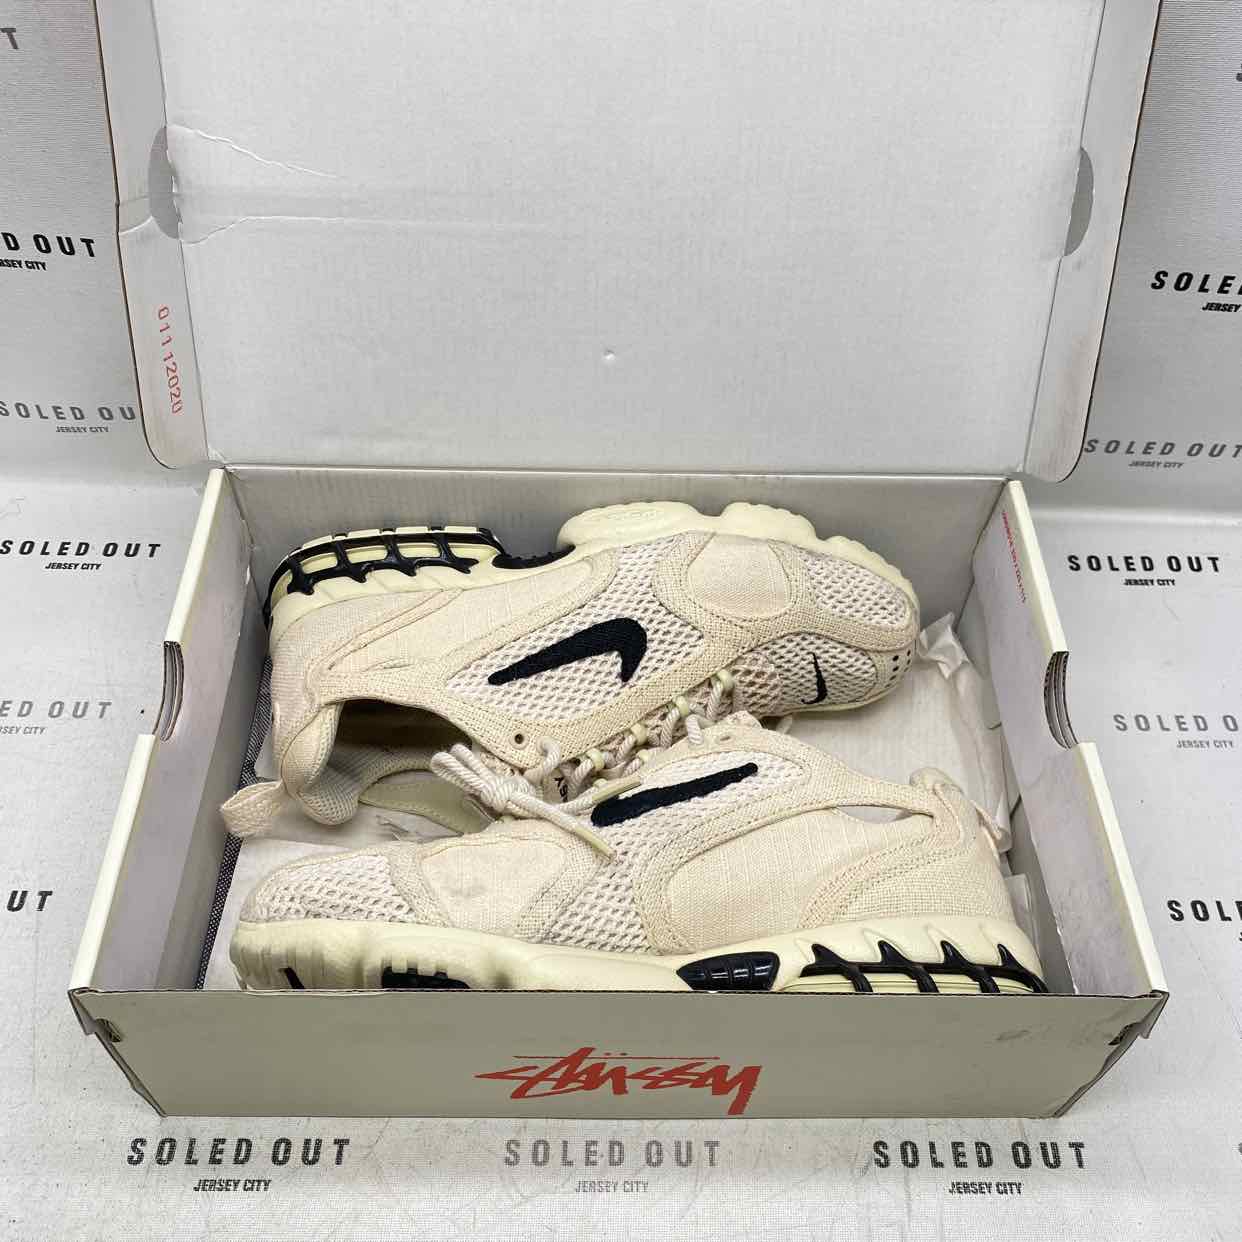 Nike Air ZM Spiridon CG 2 &quot;STUSSY FOSSIL&quot; 2020 Used Size 9